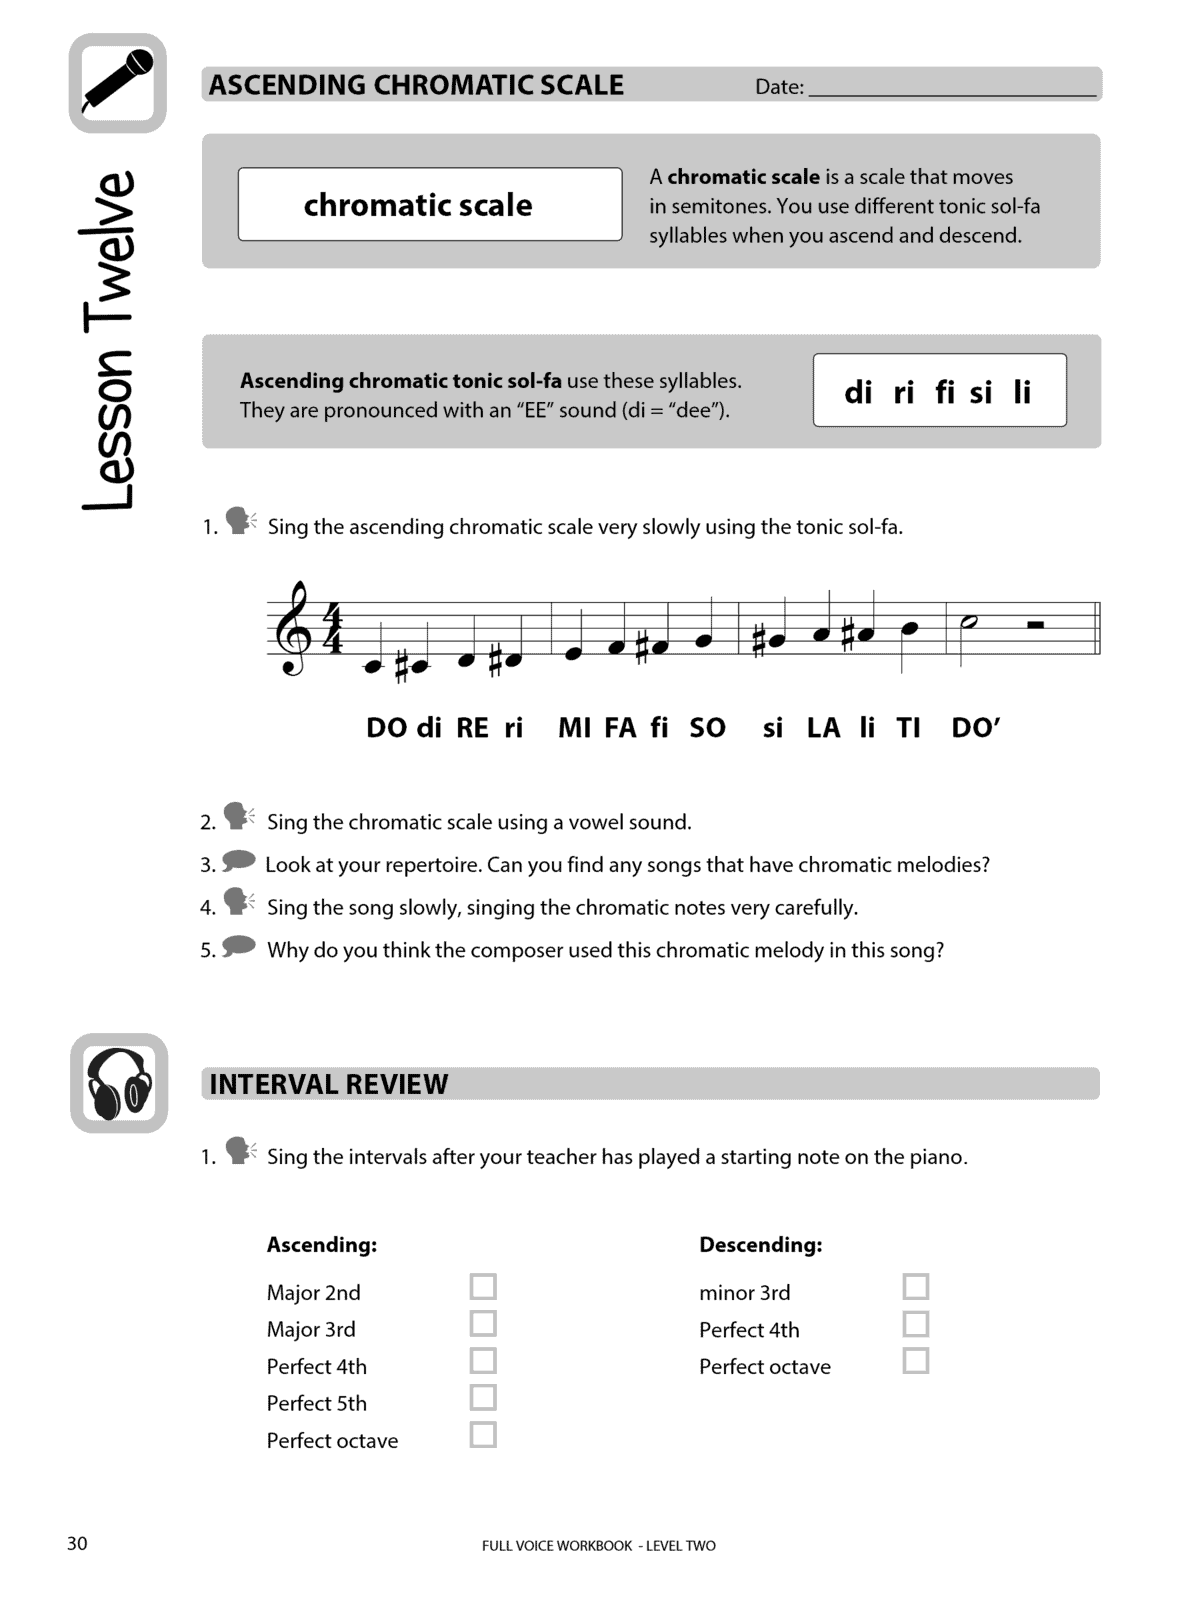 FULL VOICE Student Workbook - Level Two